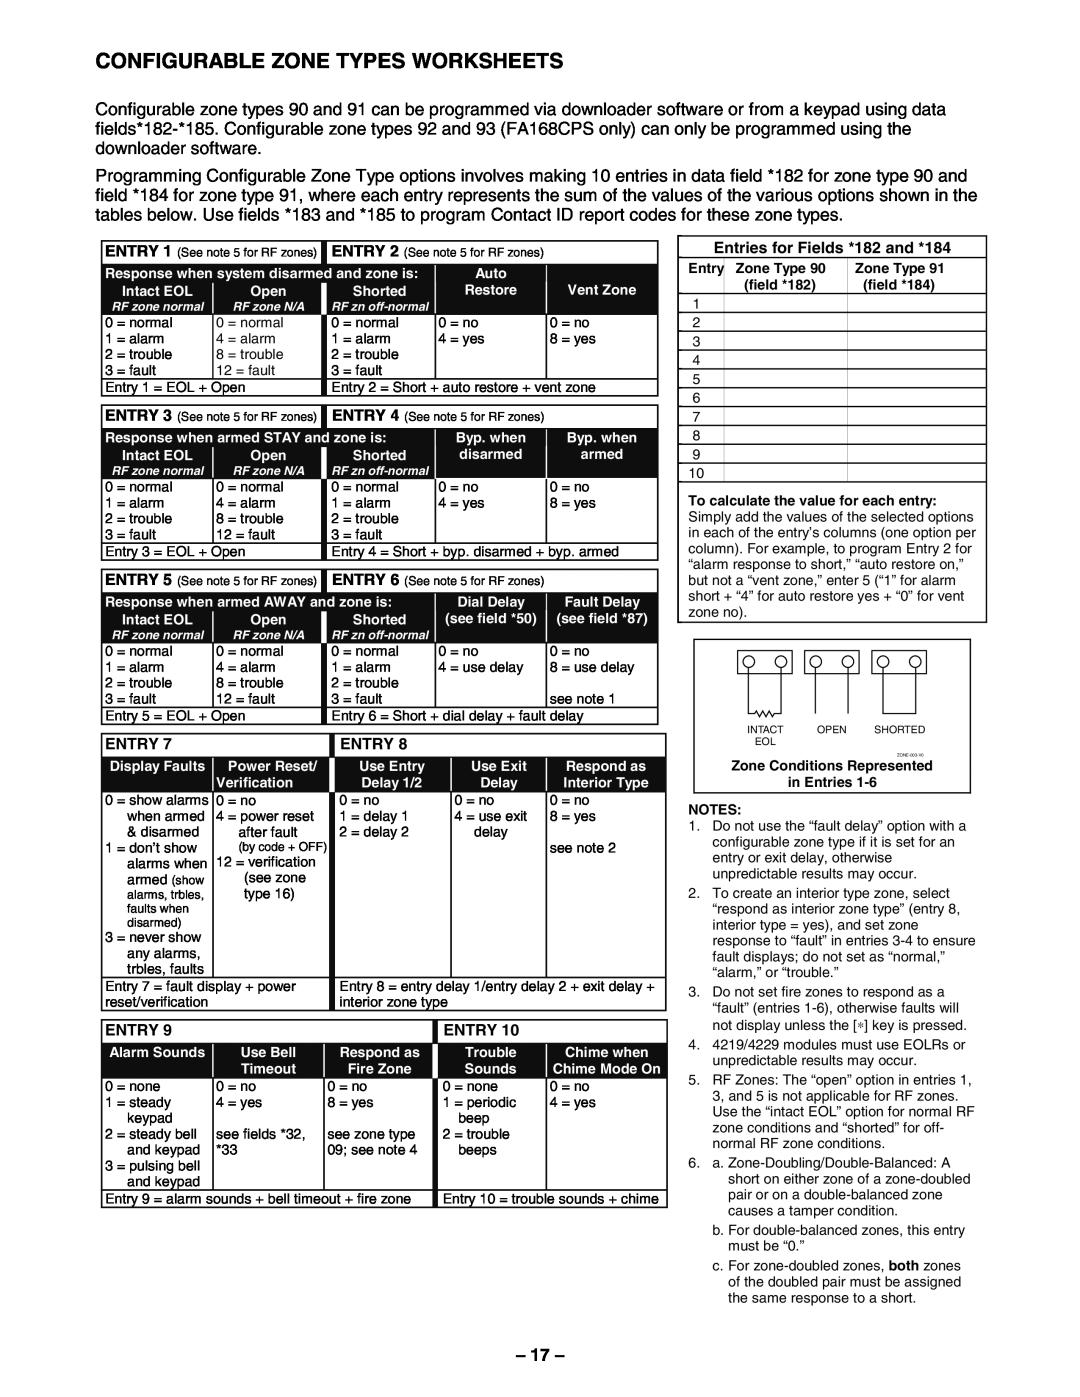 First Alert FA148CPSSIA manual Configurable Zone Types Worksheets 